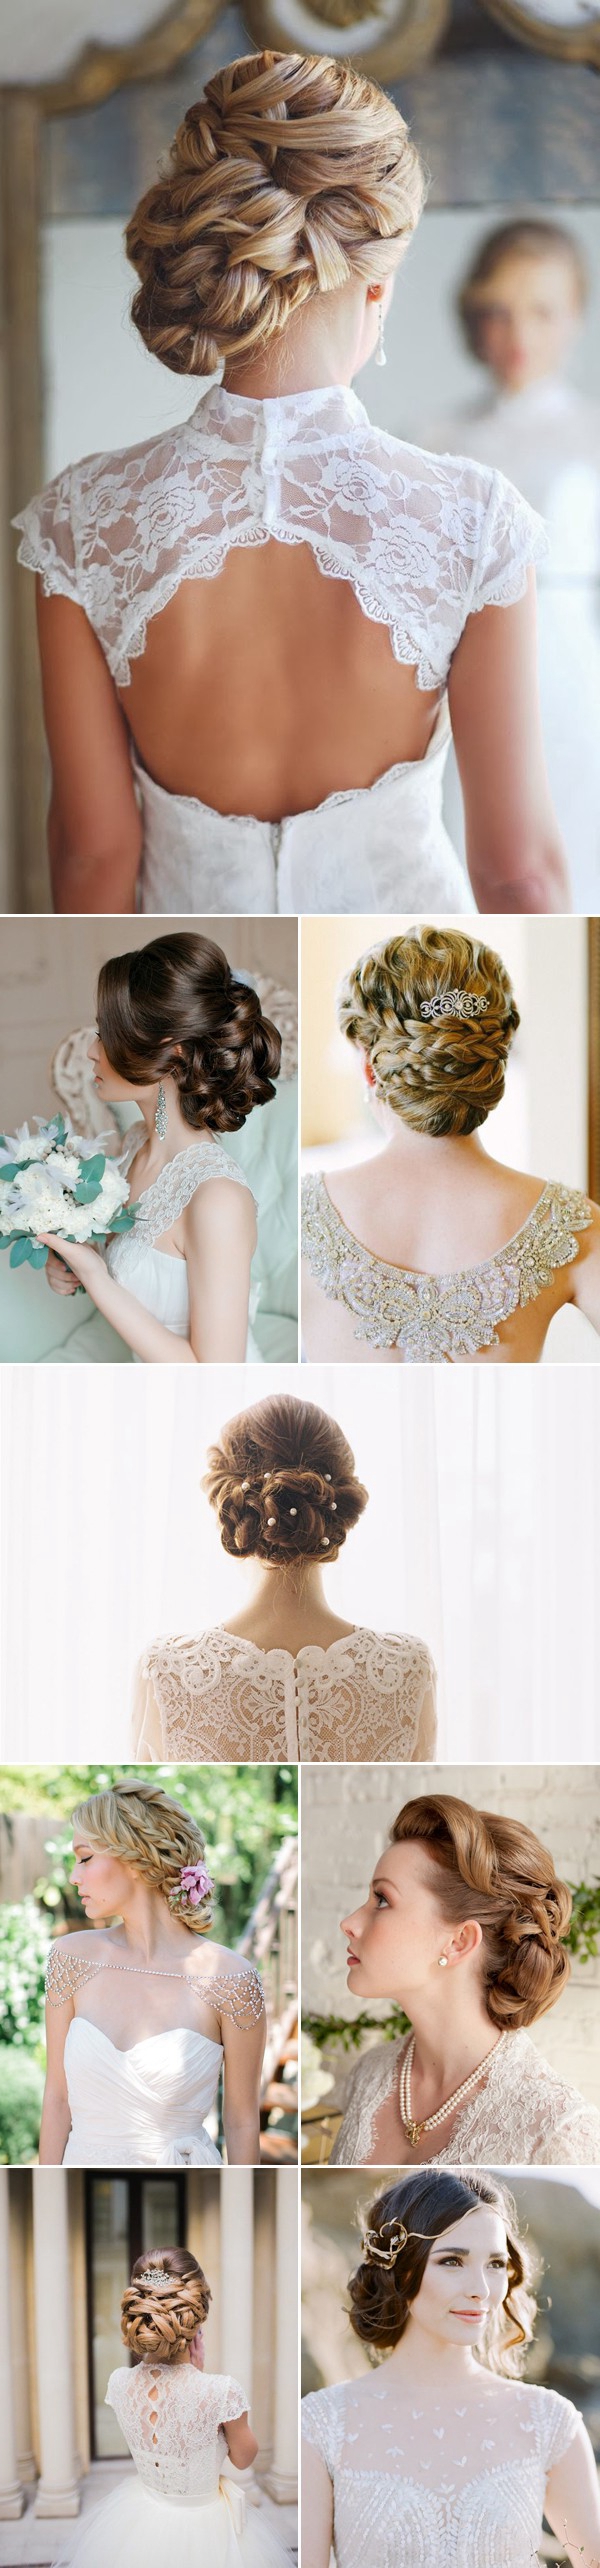 braided-updo-hairstyles-for-wedding